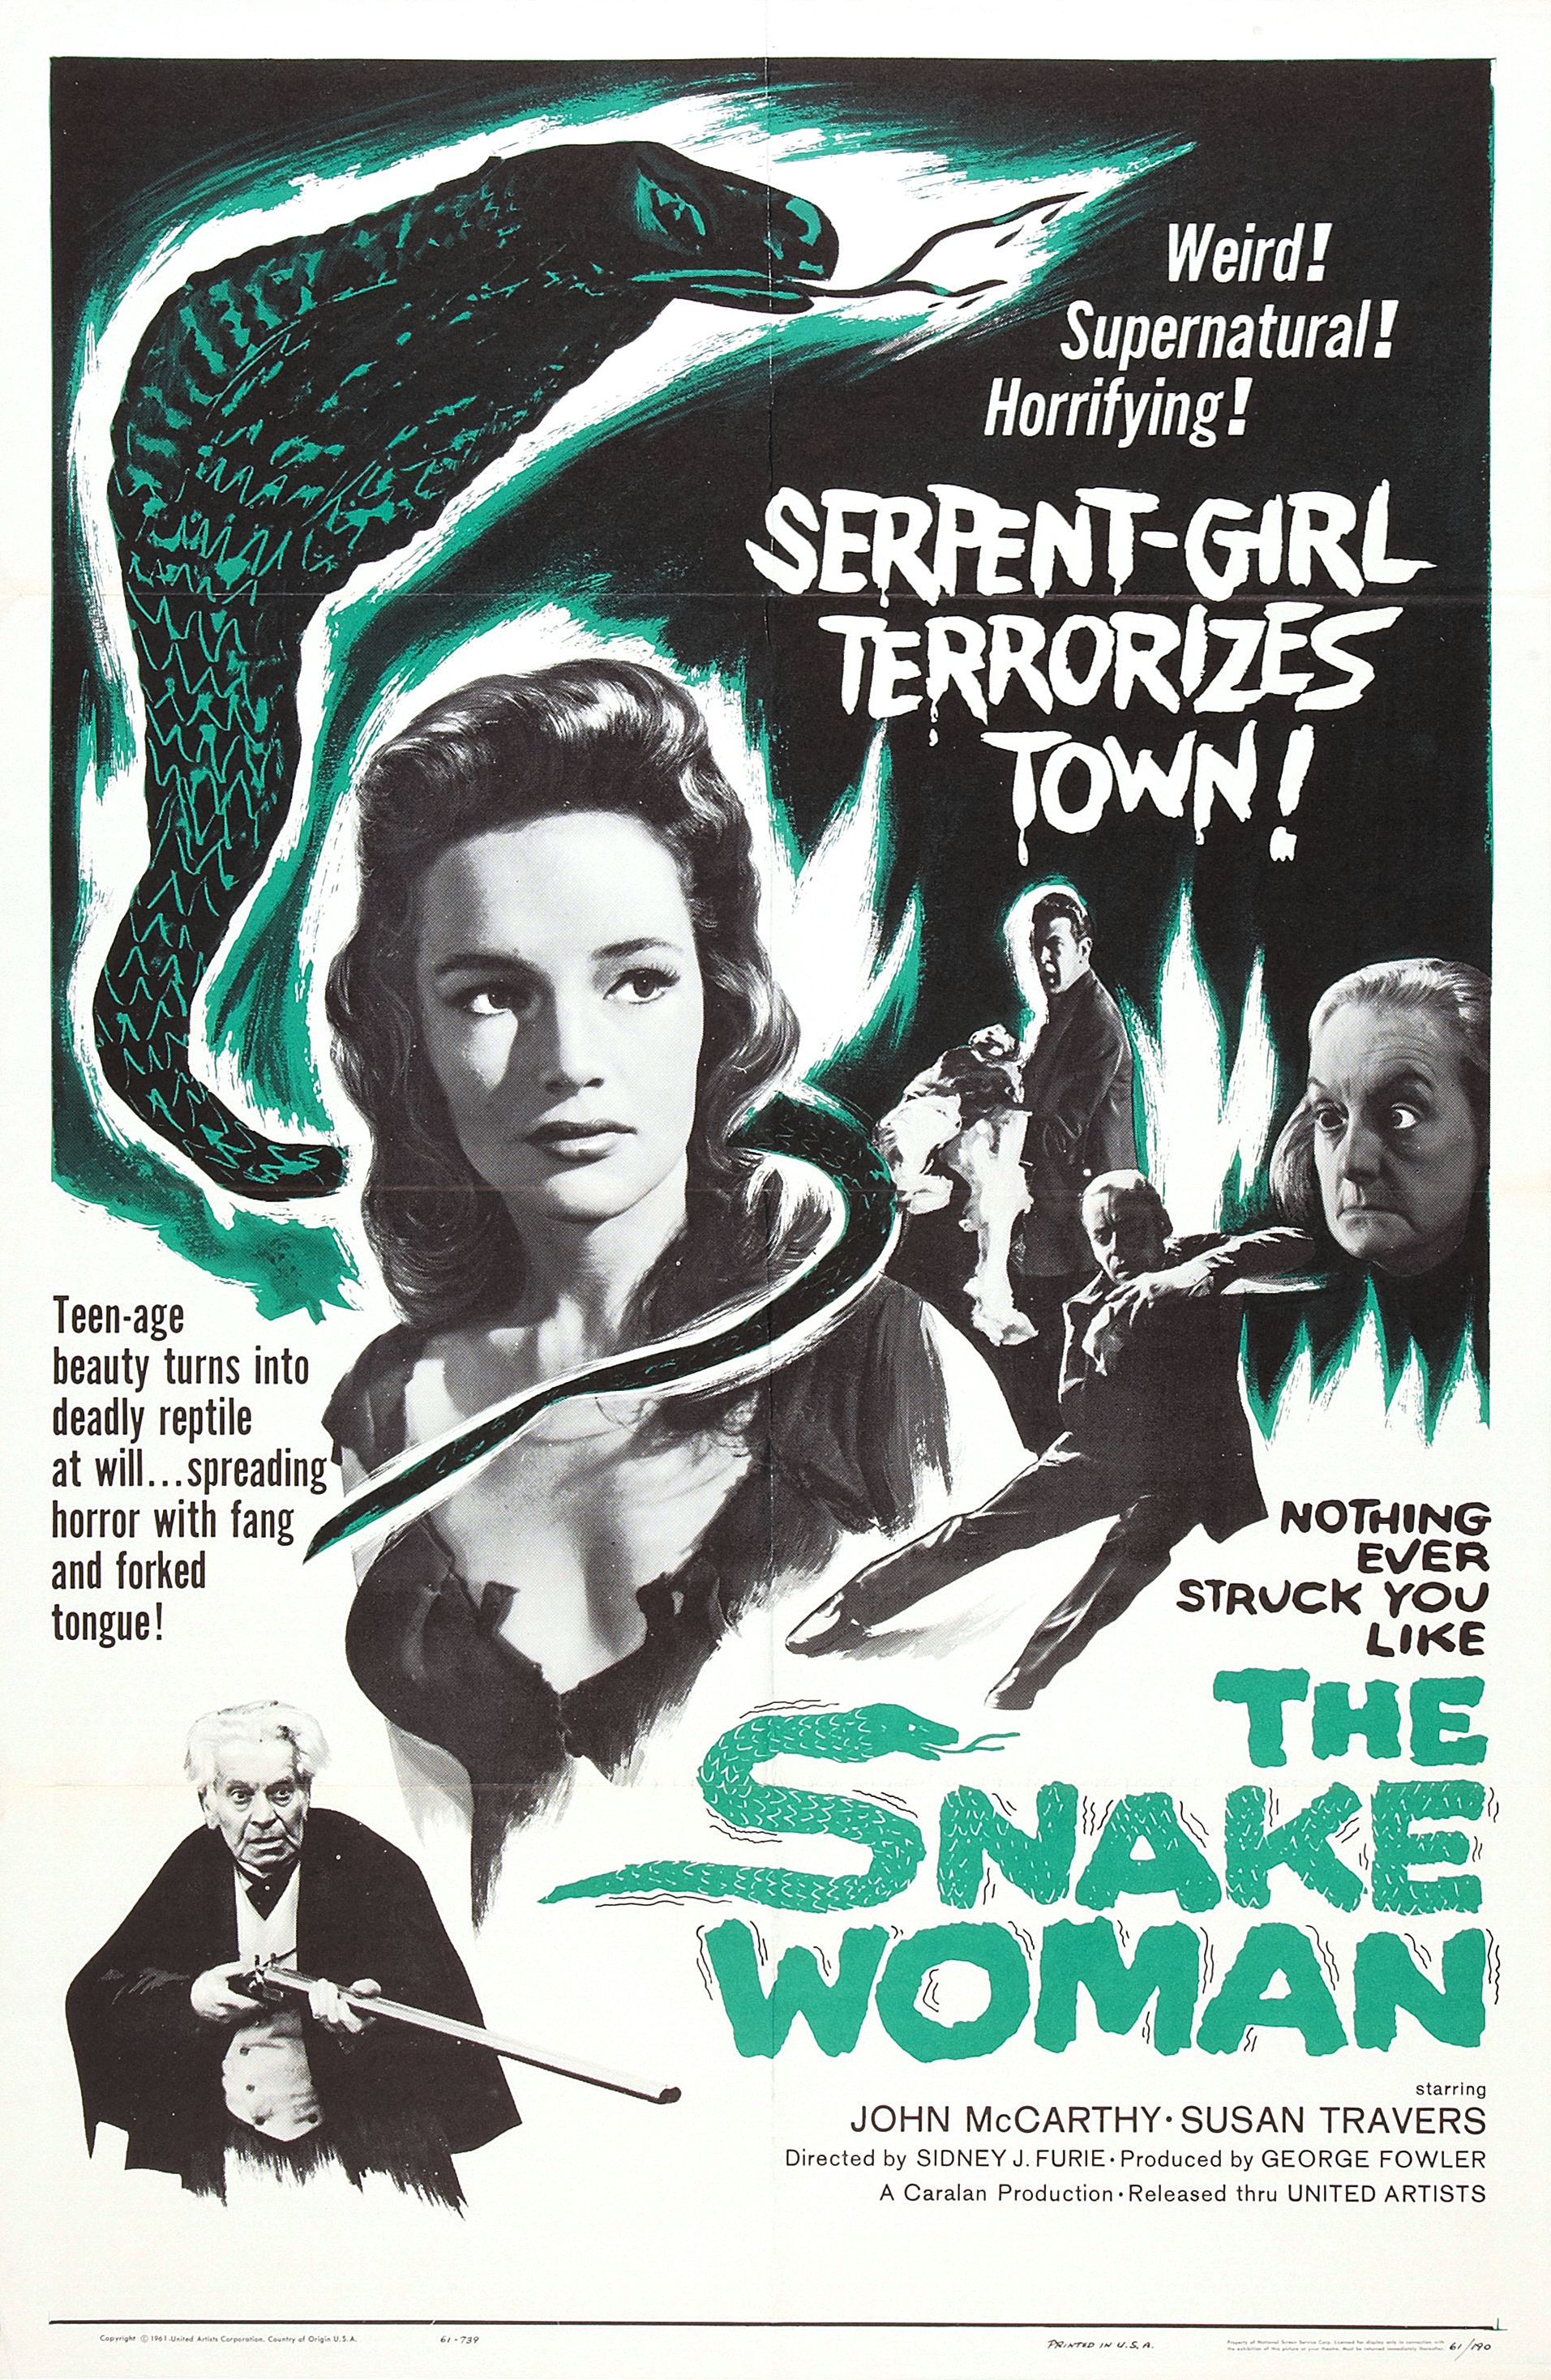 The Snake Woman (1961)